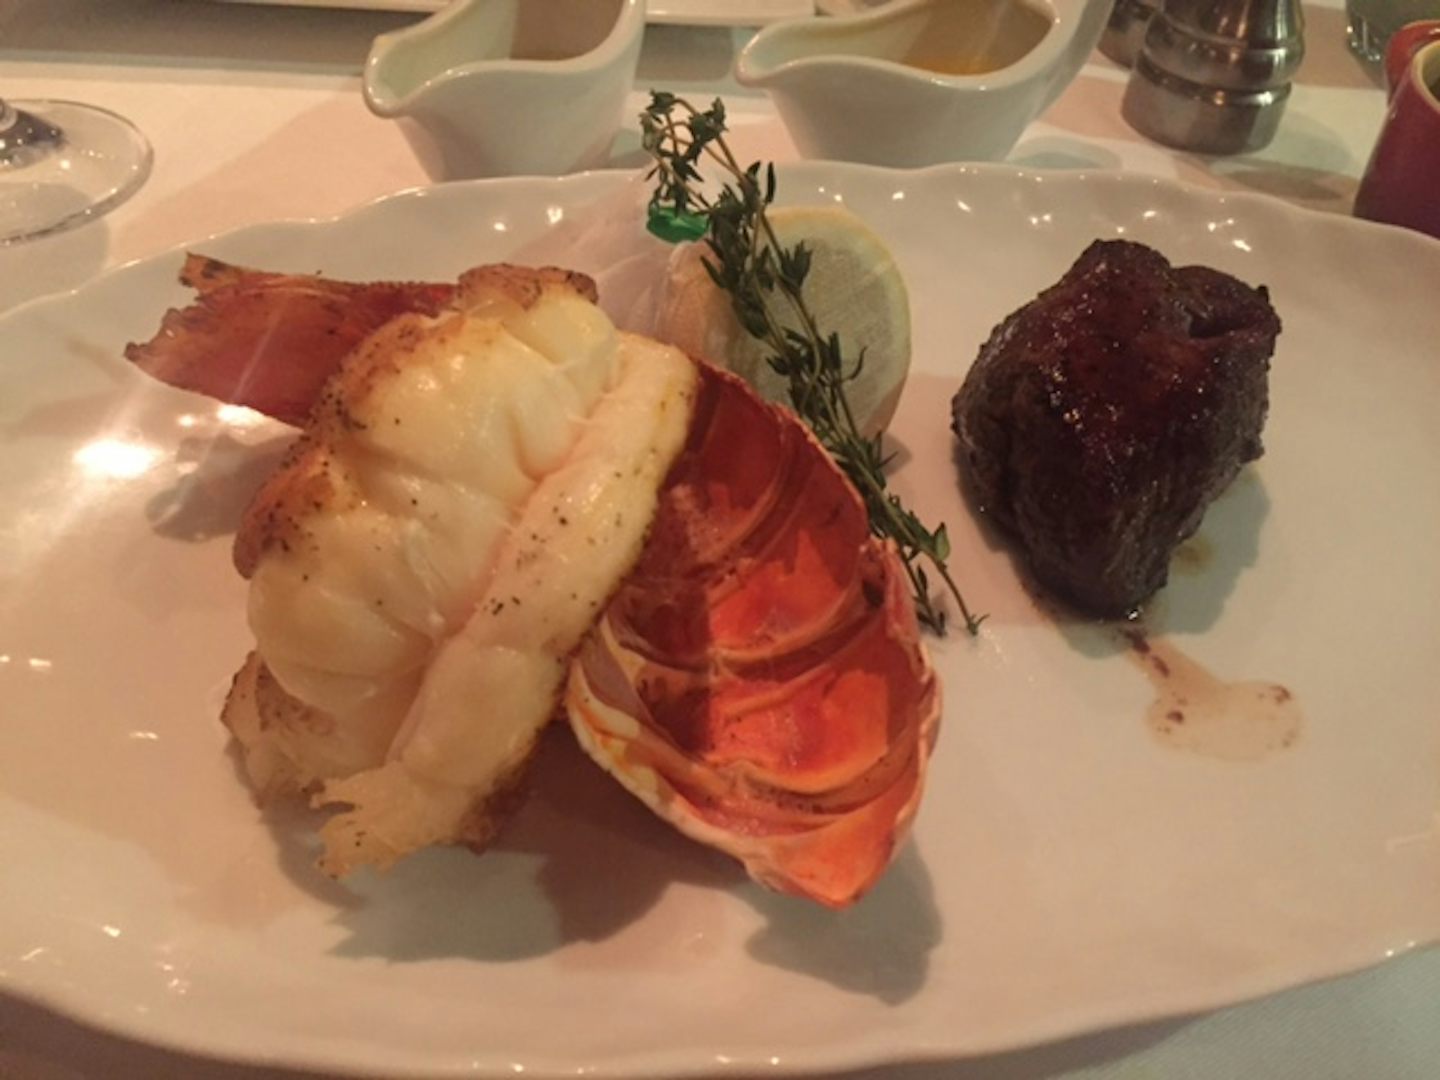 This is the surf and turf at Ocean Blue